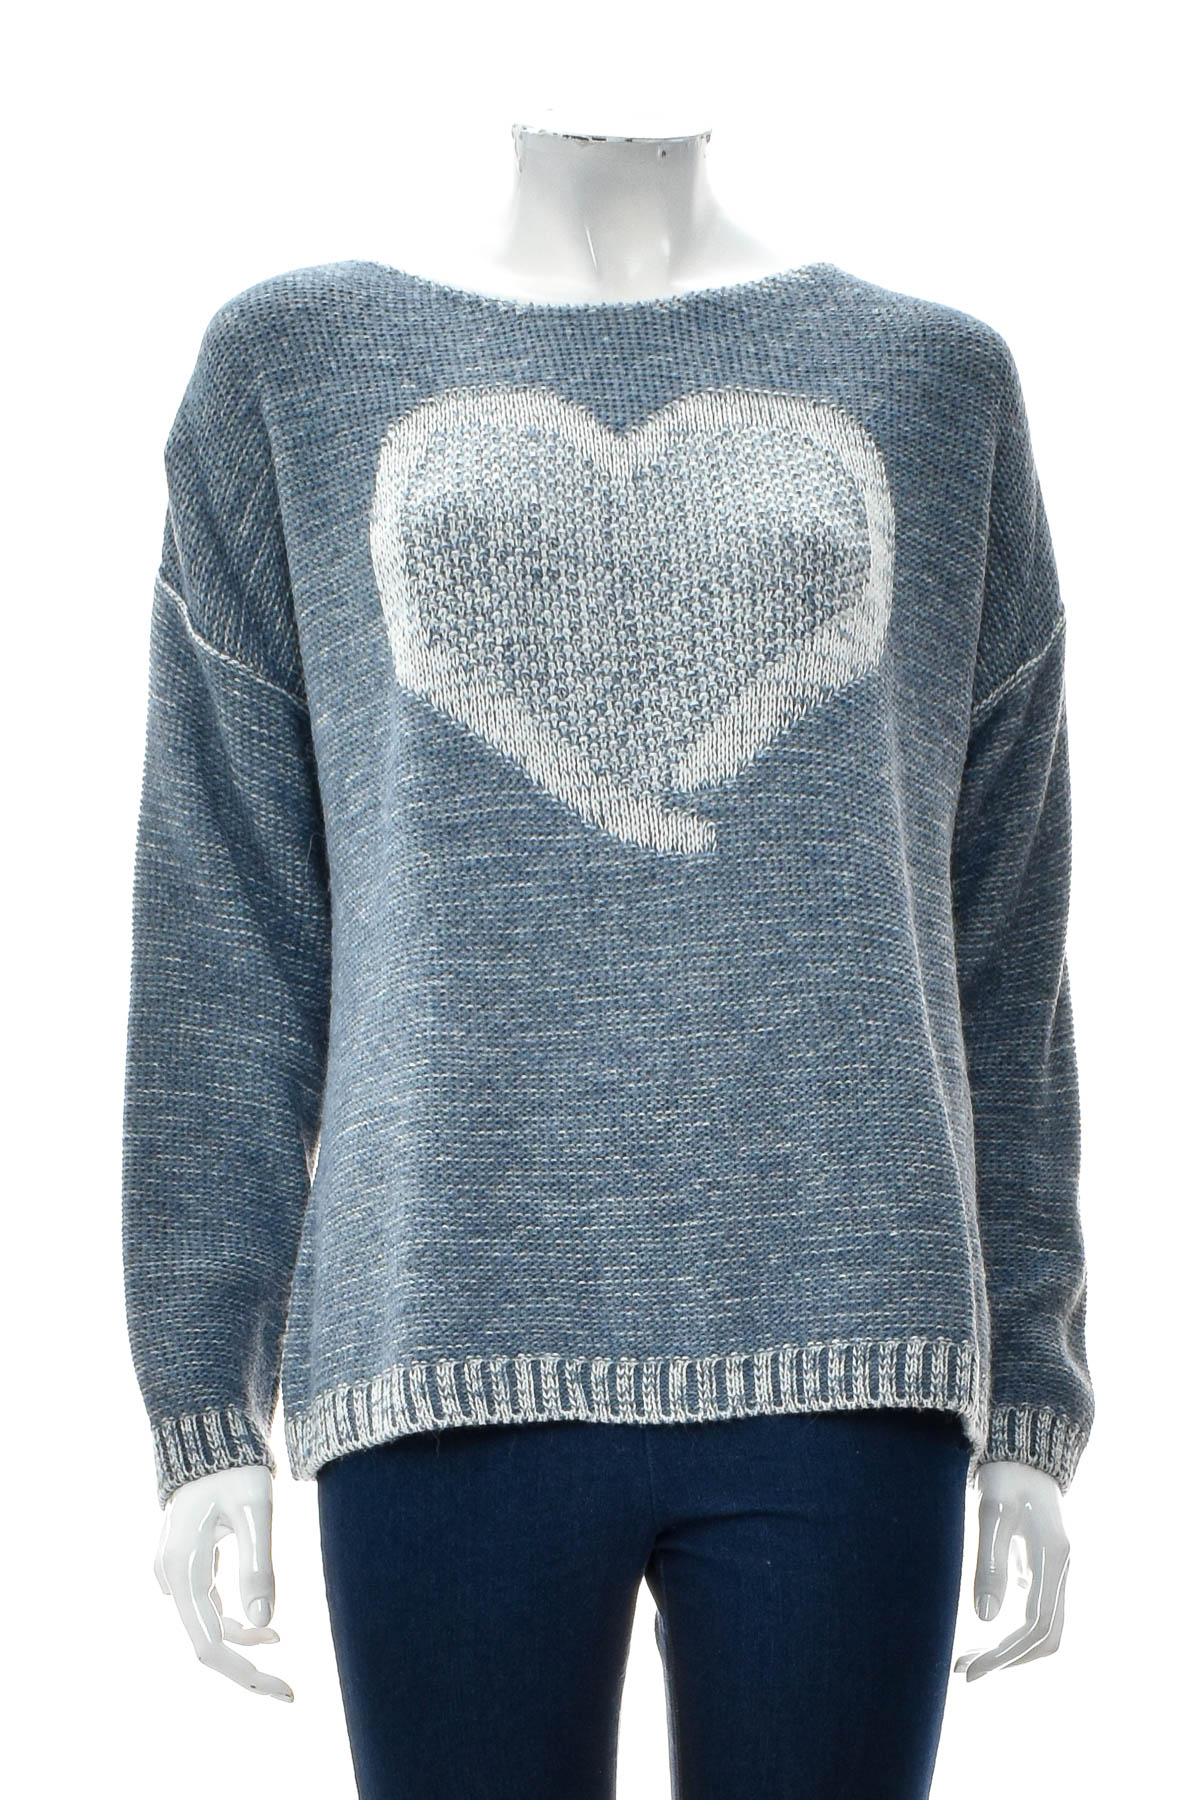 Women's sweater - Amy by AMY VERMONT - 0